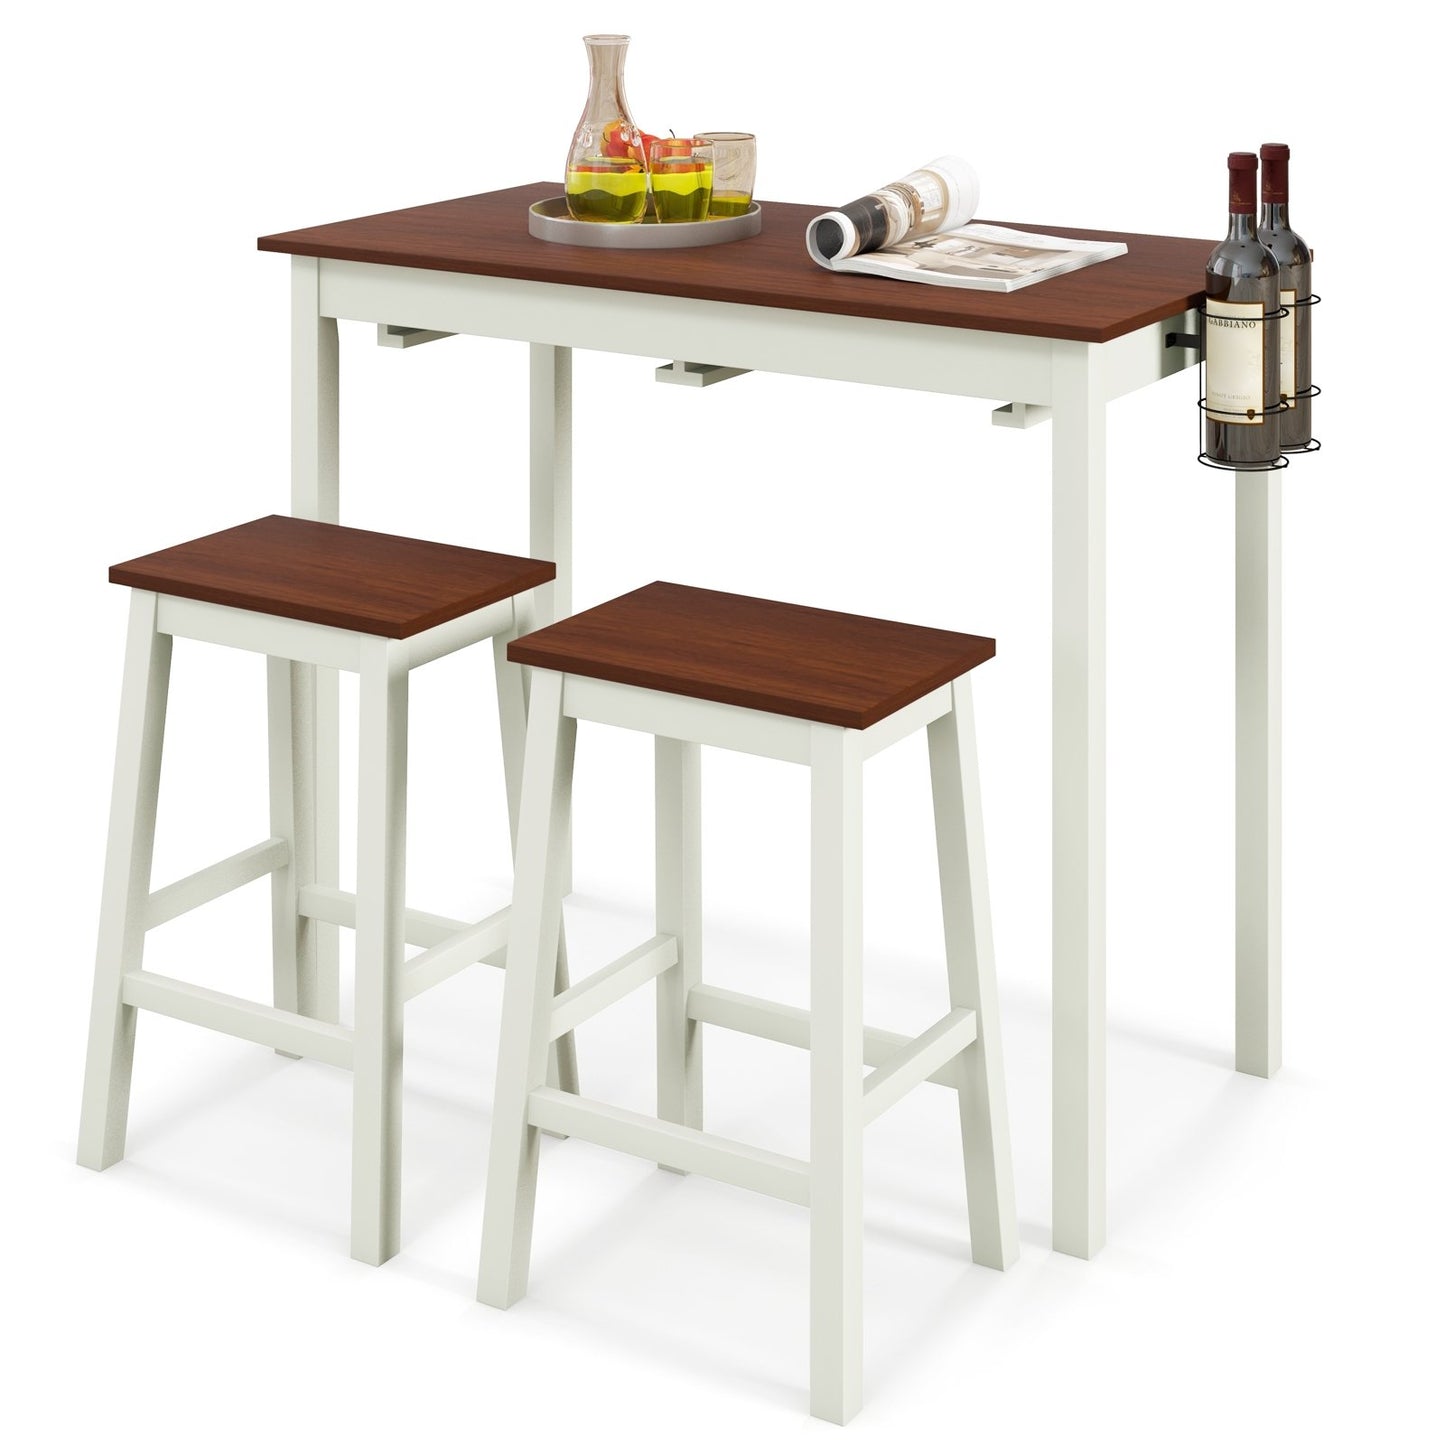 3-Piece Bar Table Set with 2 Wine Holders and Wooden Legs, White